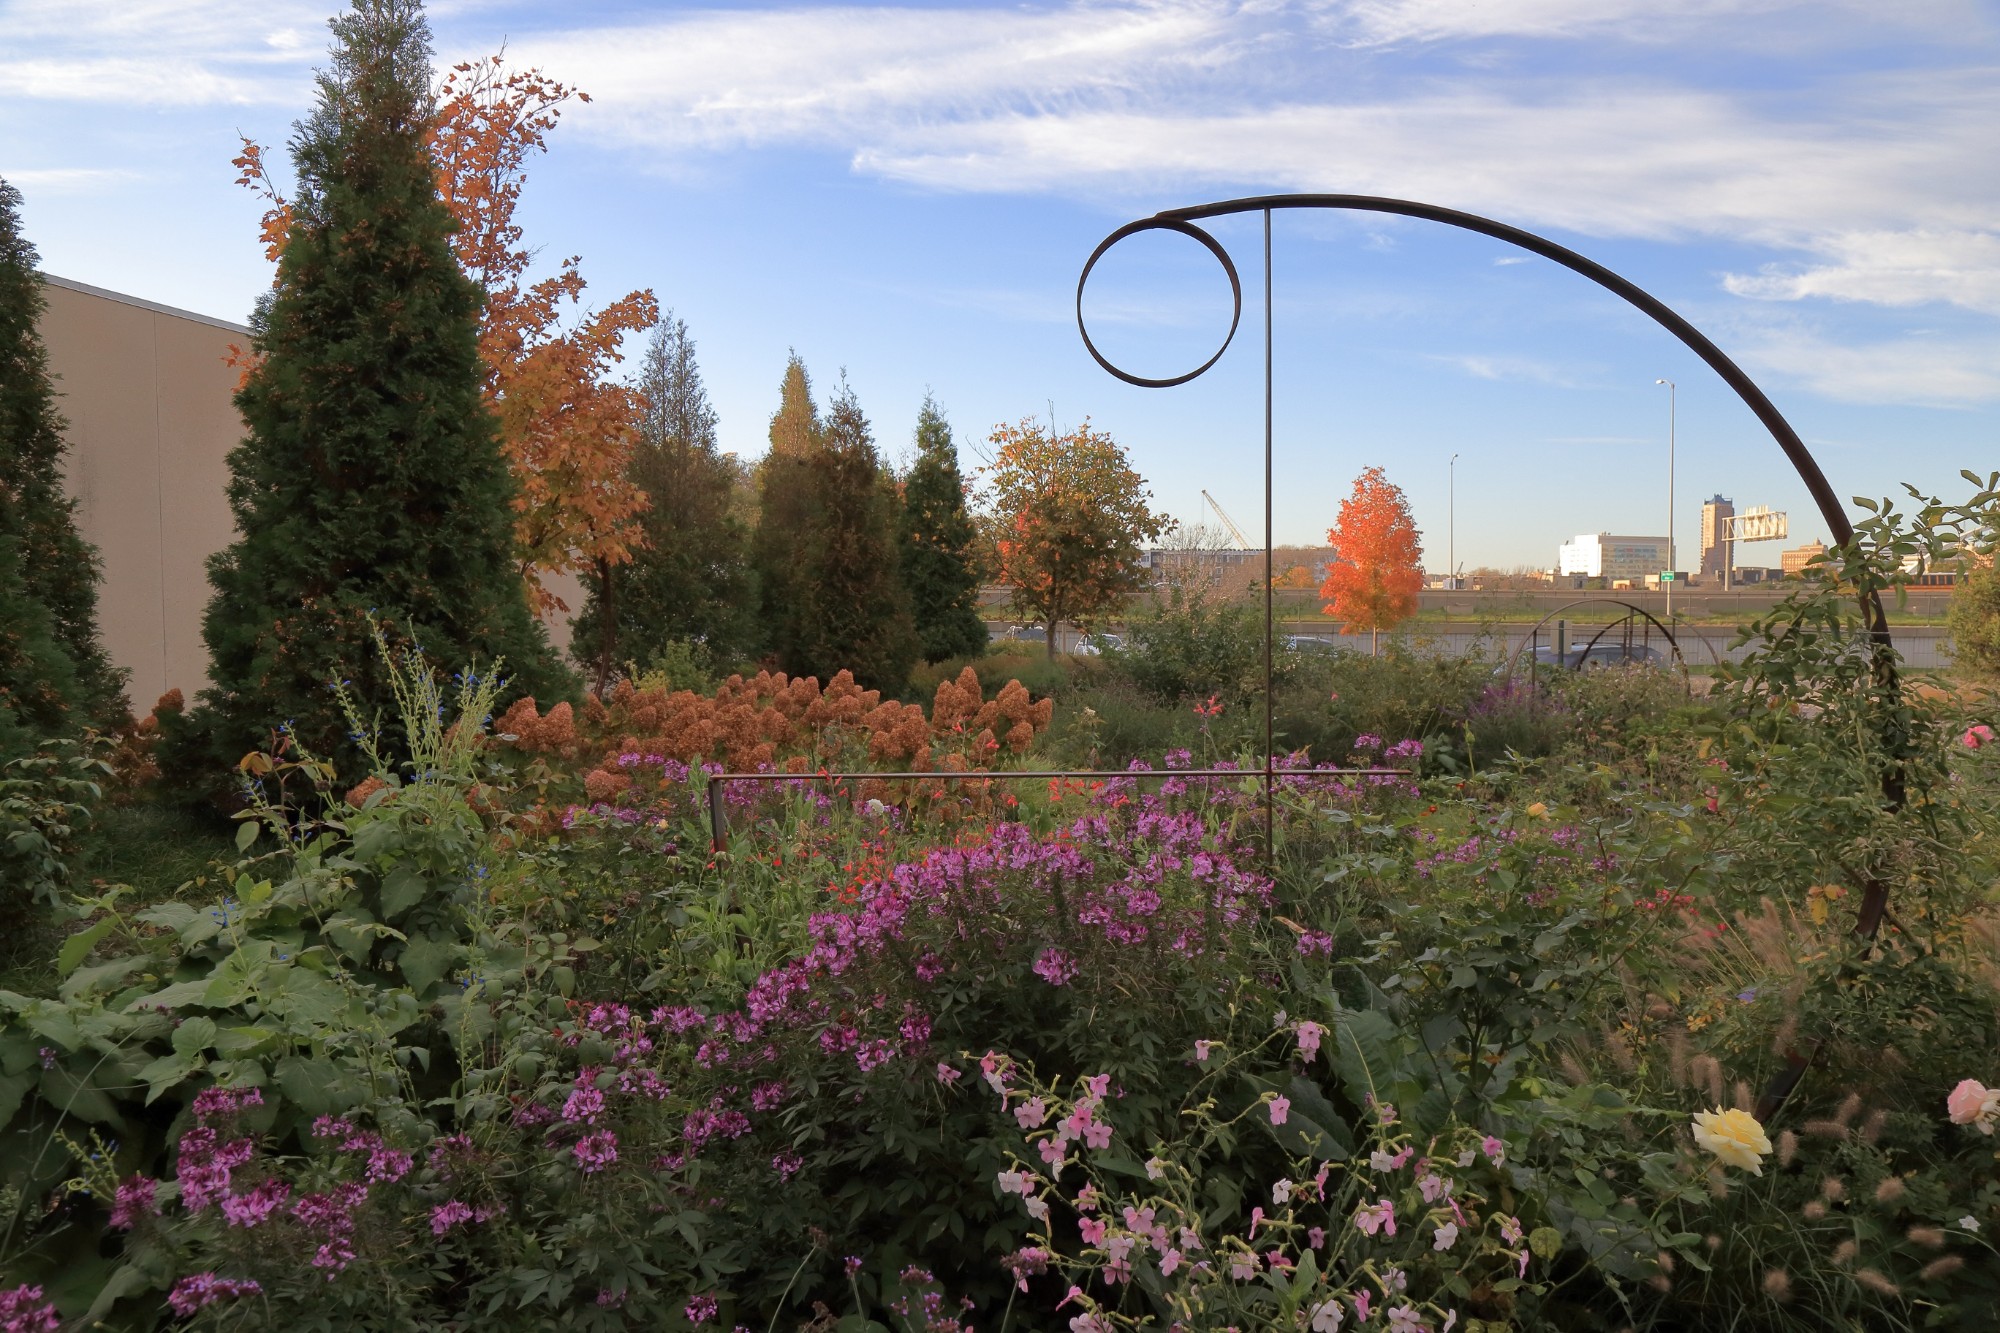 The Wells Fargo Rose Garden on October 26. Photo by Kelly Norris.